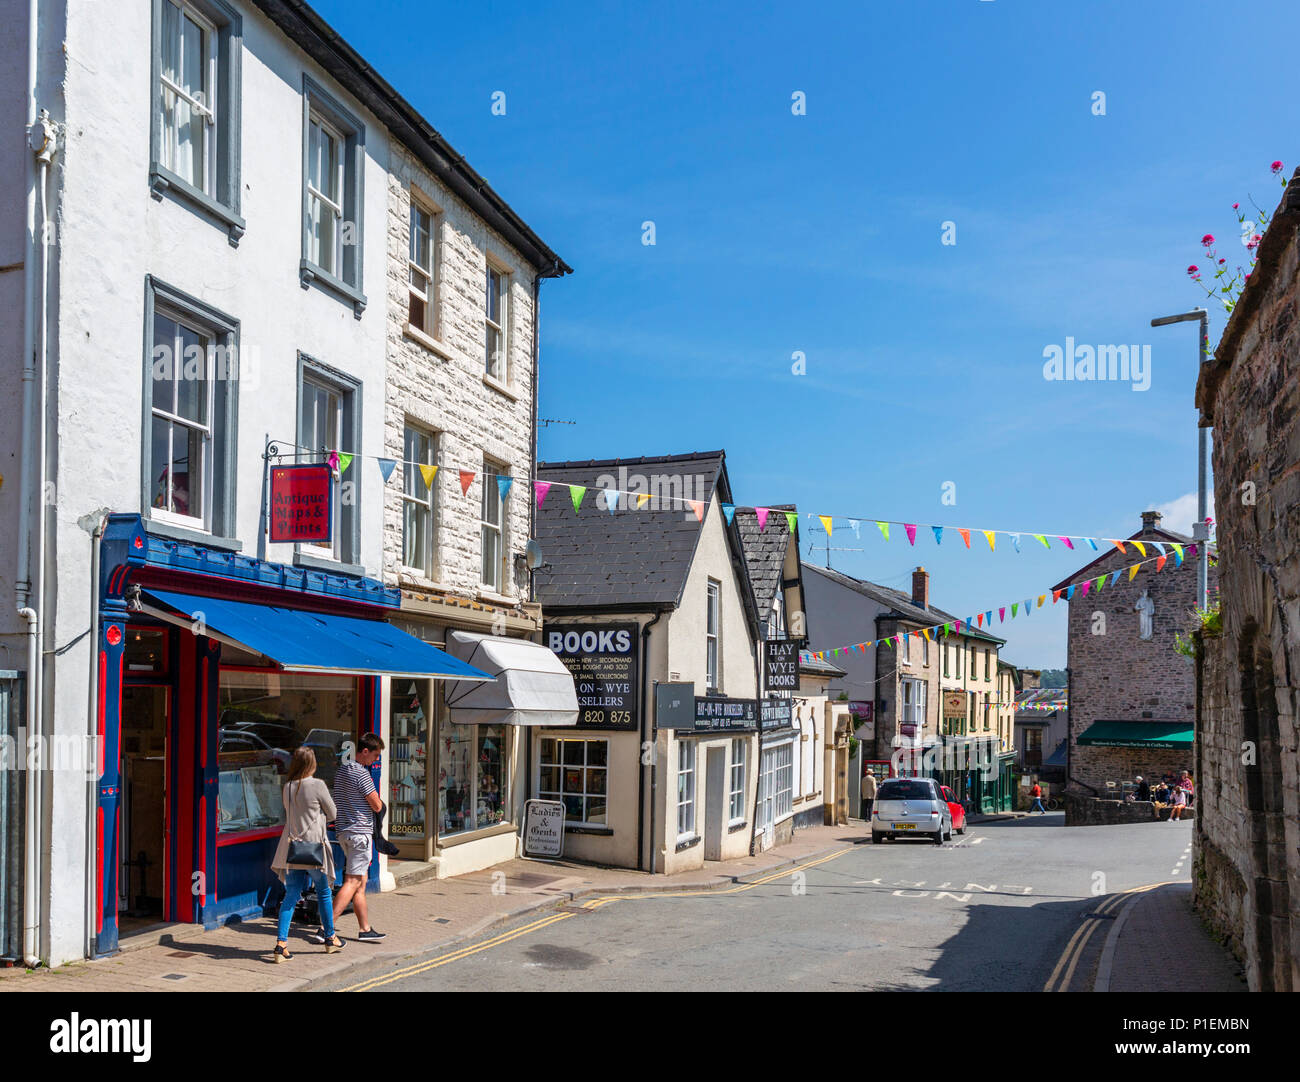 Bookshops on Castle Street/High Town in the town centre, Hay-on-Wye, Powys, Wales, UK Stock Photo